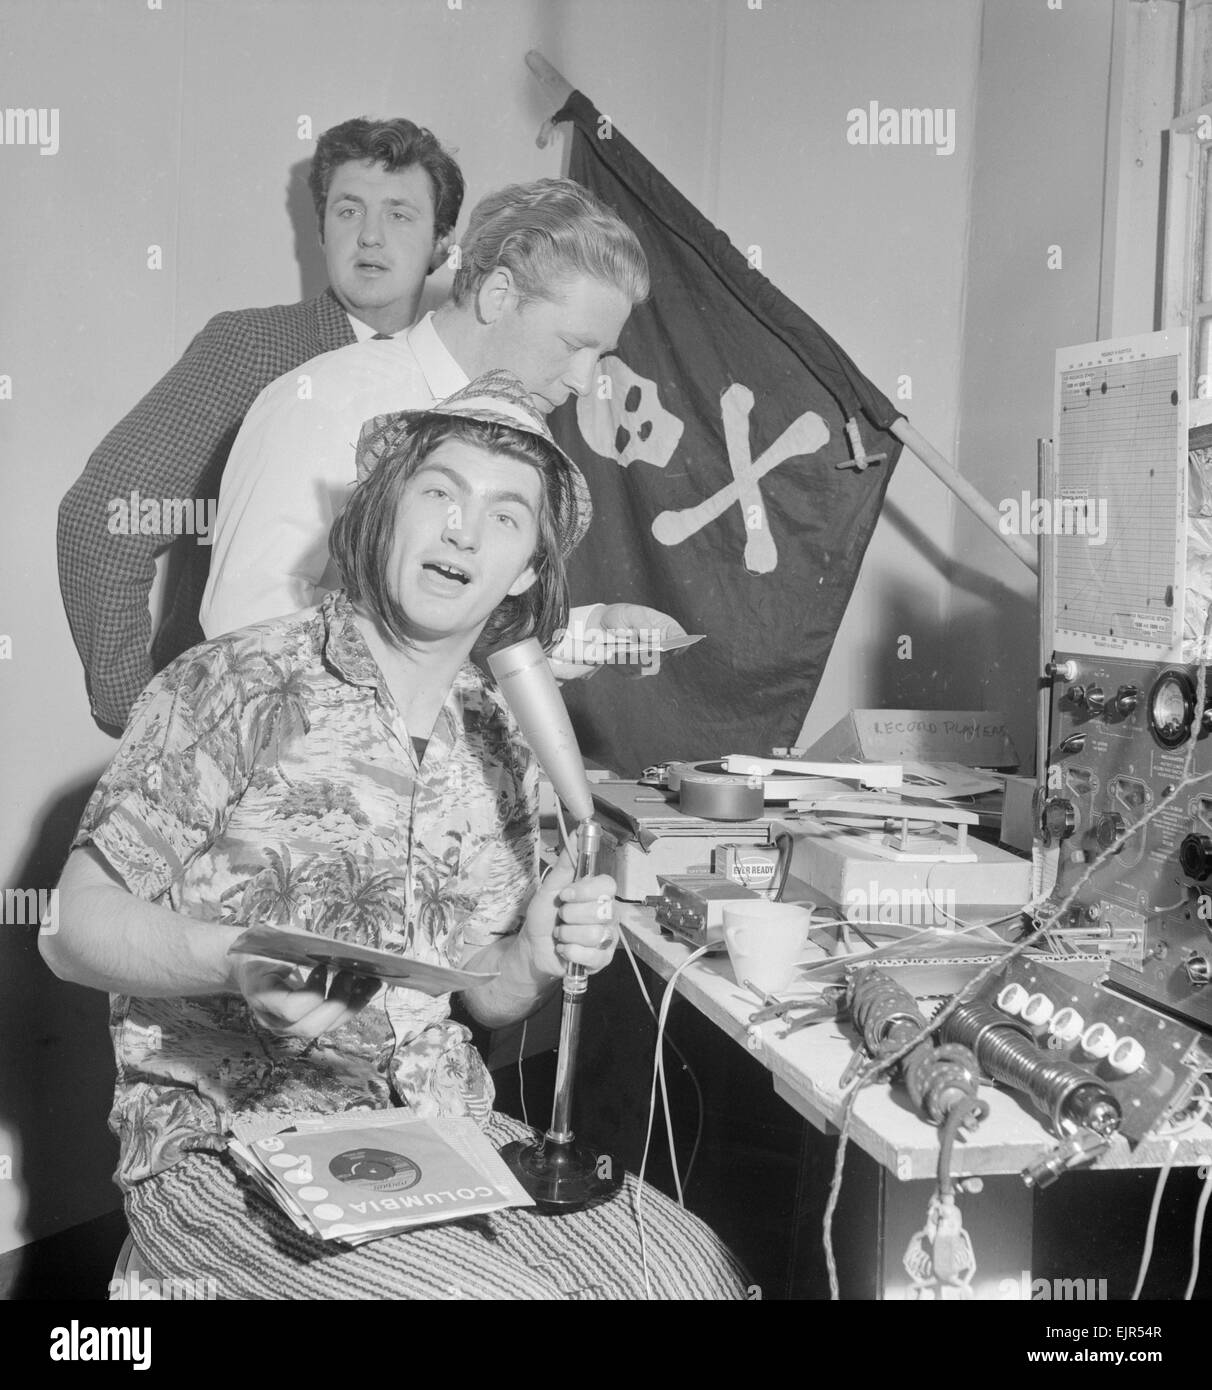 Pirate Radio Station Sutch Radio, which is broadcasting from Radio City, a complex of forts in the Thames Estuary, 28th May 1964. Pictured: Lord Sutch (seated), Reg Calvert (fair hair) & Brian Paul (at rear) Lord Sutch a.k.a. Screaming Lord Sutch. Reg Calvert Murder Case 1966. It was alleged that Mr Calvert was shot and killed at teh home of Mr Smedleyin Wendens Ambo near Saffron Walden (21st June 1966). Reg Calvert was head of rival pirate radio station Radio City & manager of The Fortunes pop group. Major Oliver Smedley was acquitted of murder on the grounds of self defence. Stock Photo